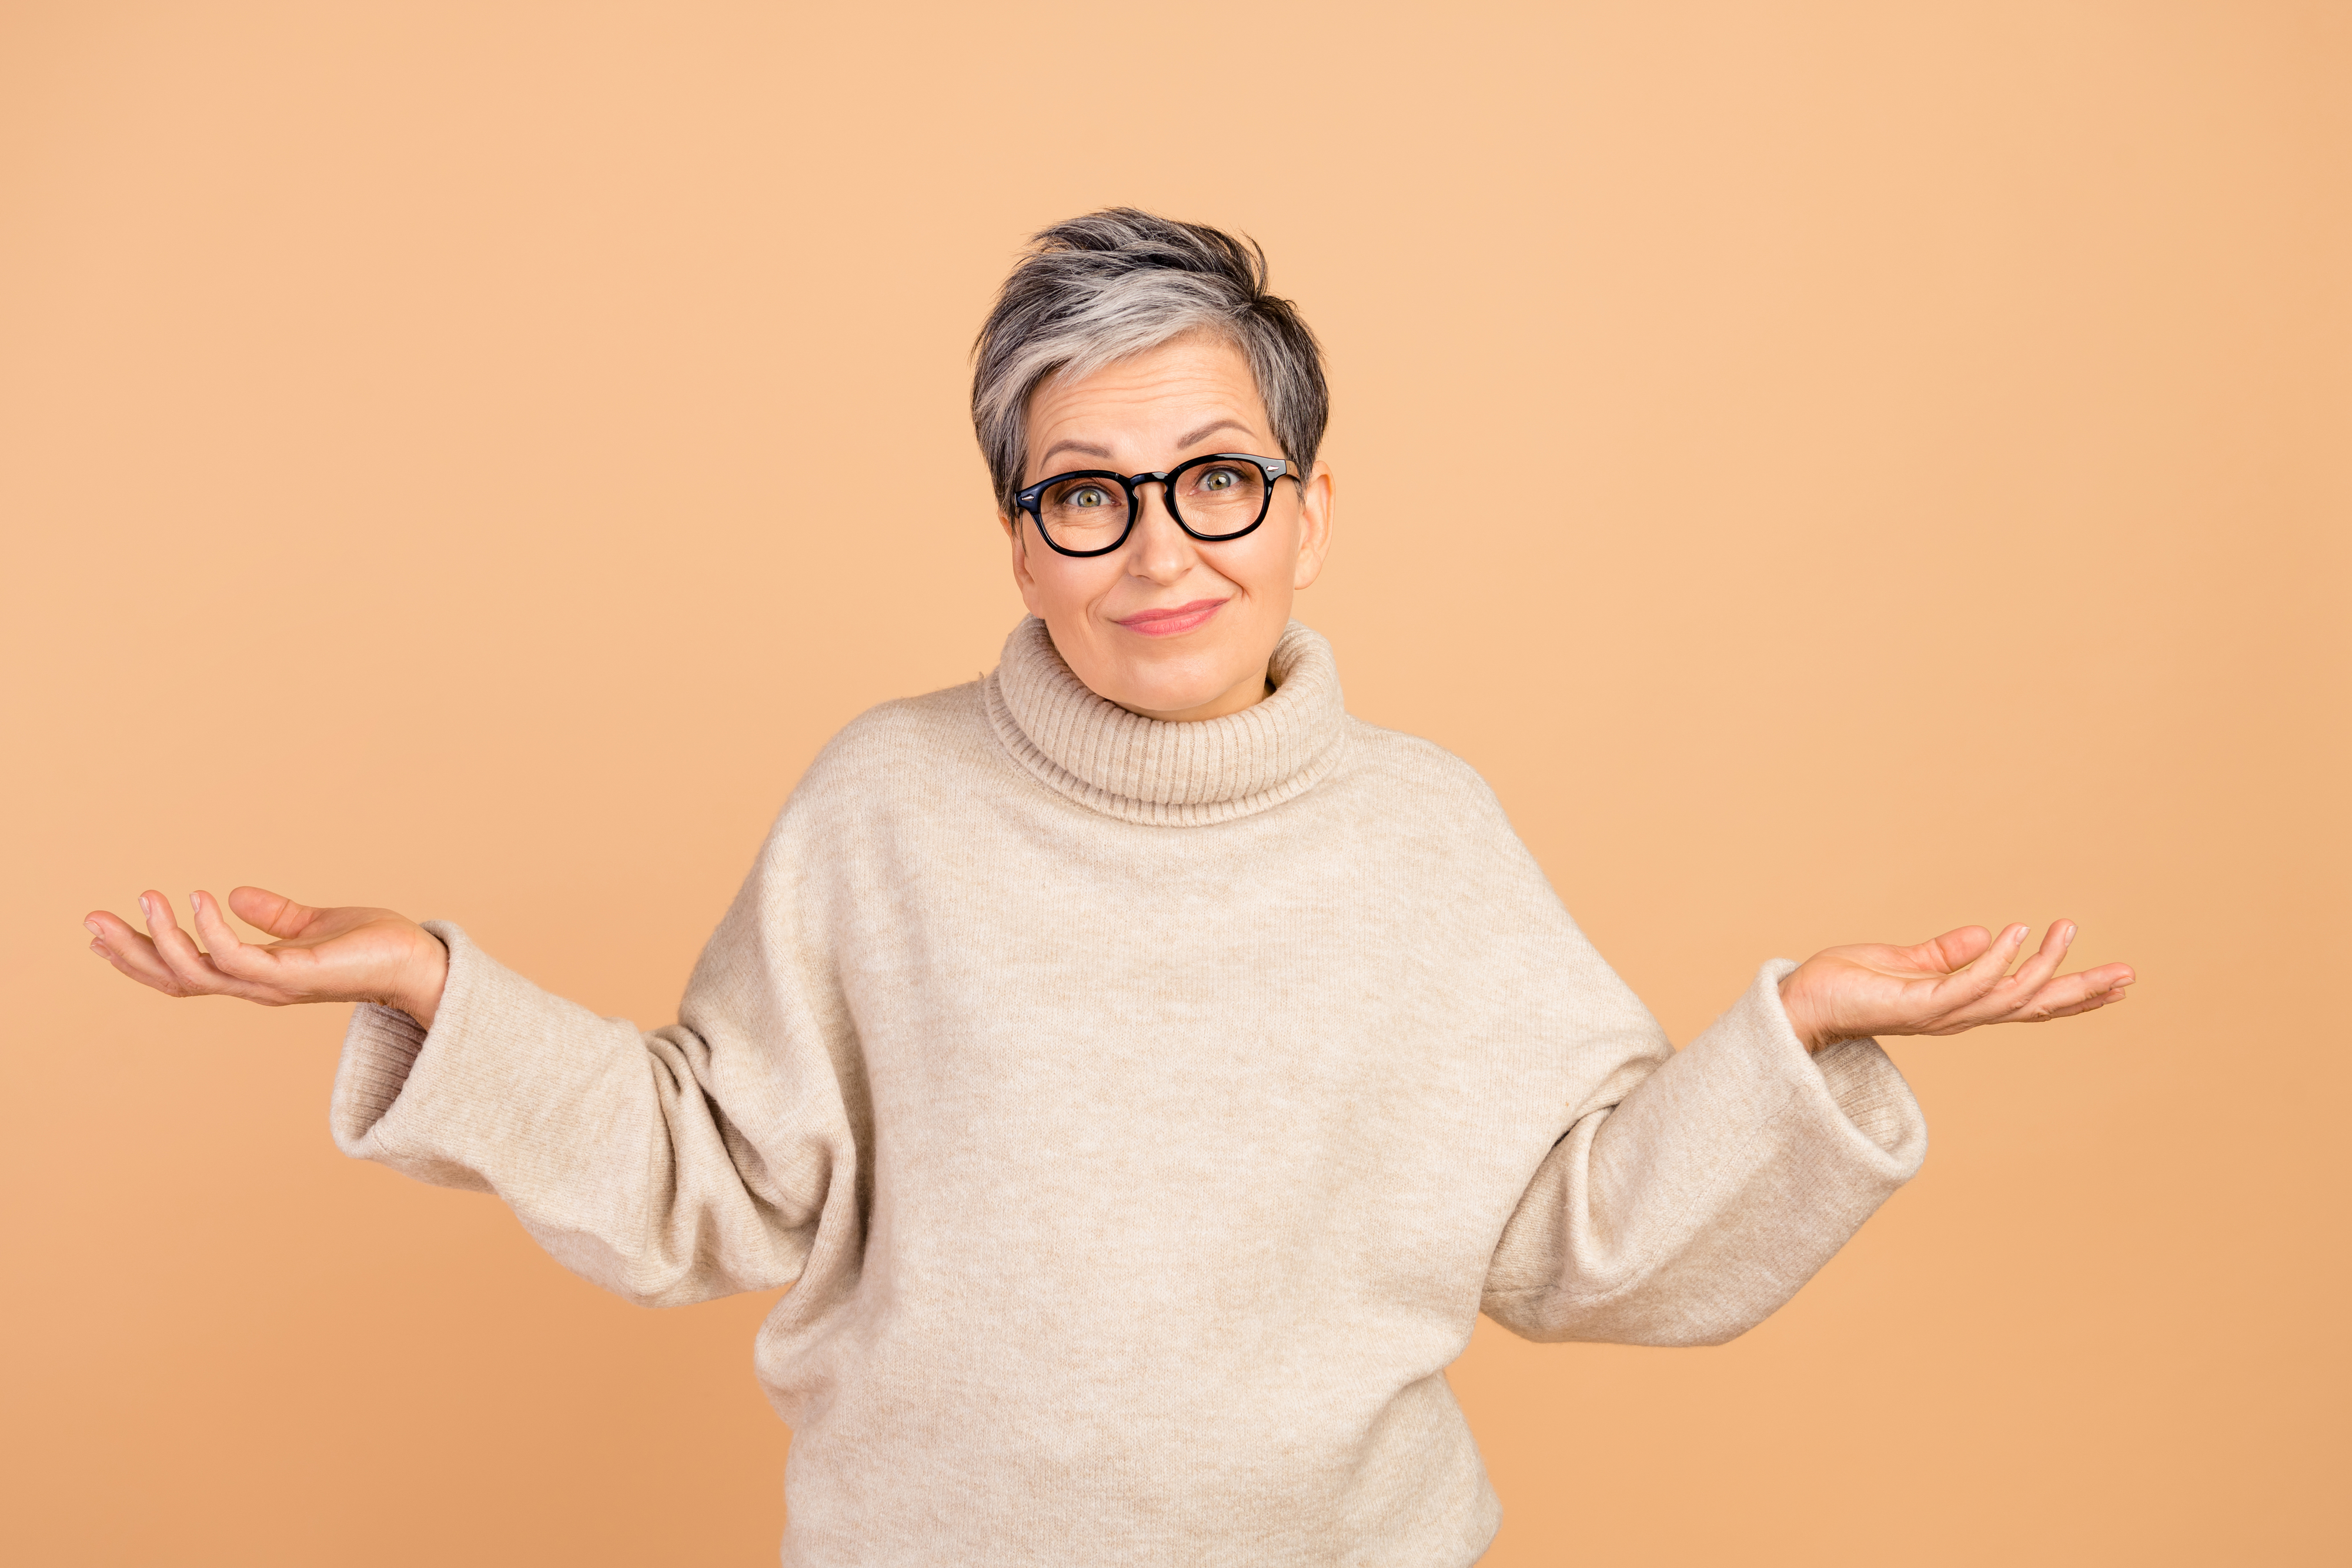 Woman with glasses nad arms outspread expressing uncertainty